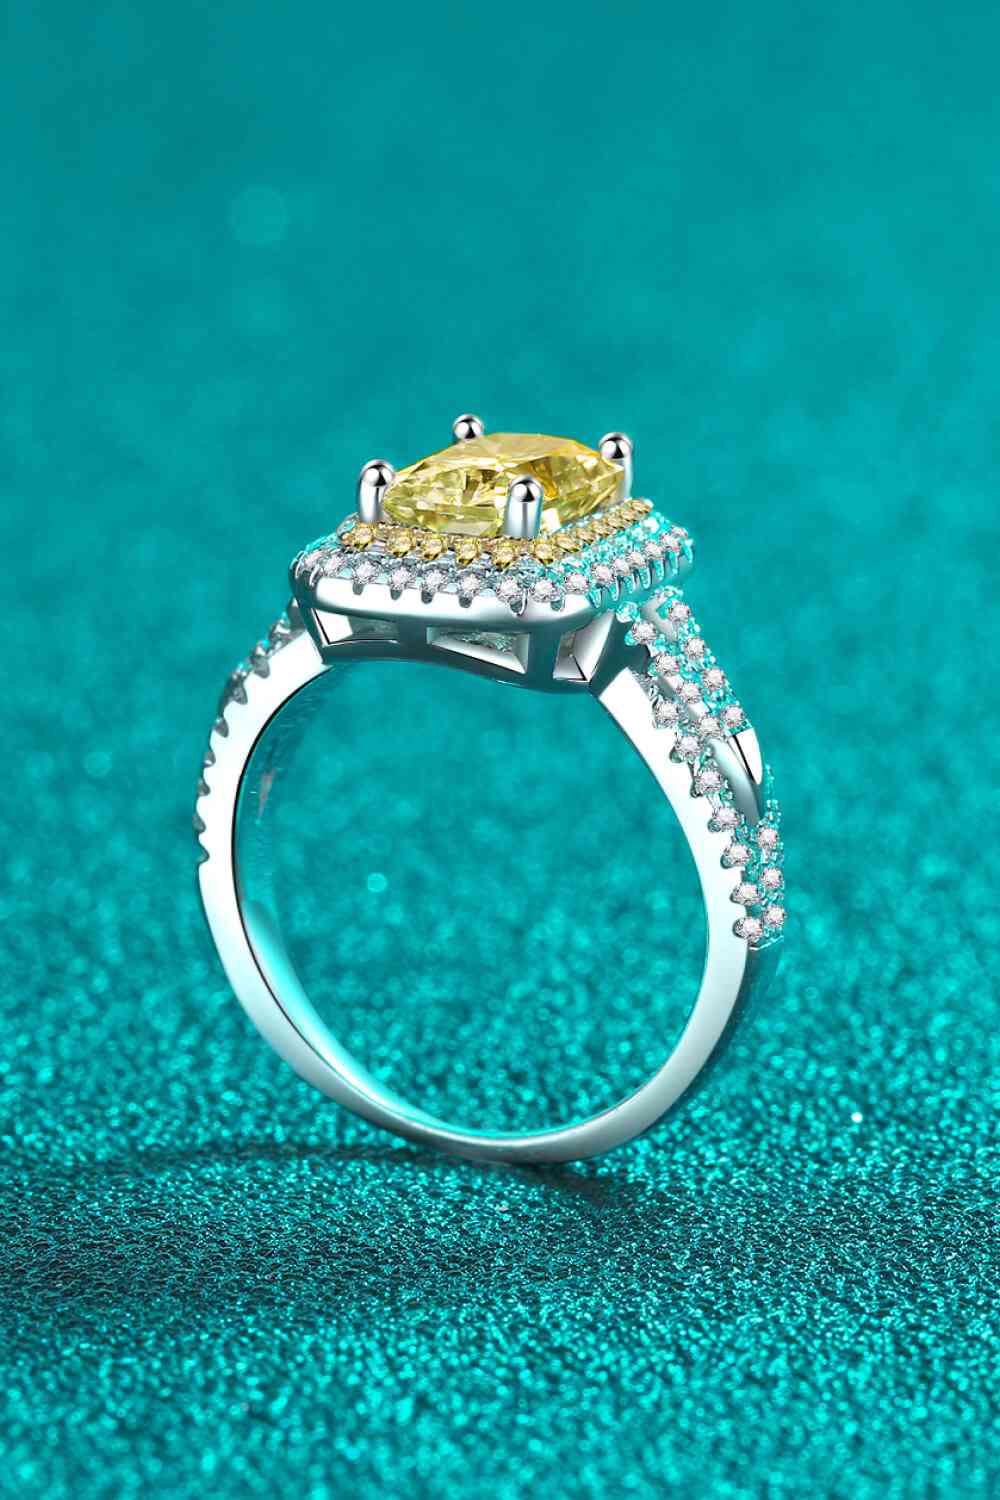 a fancy yellow diamond ring on a blue background